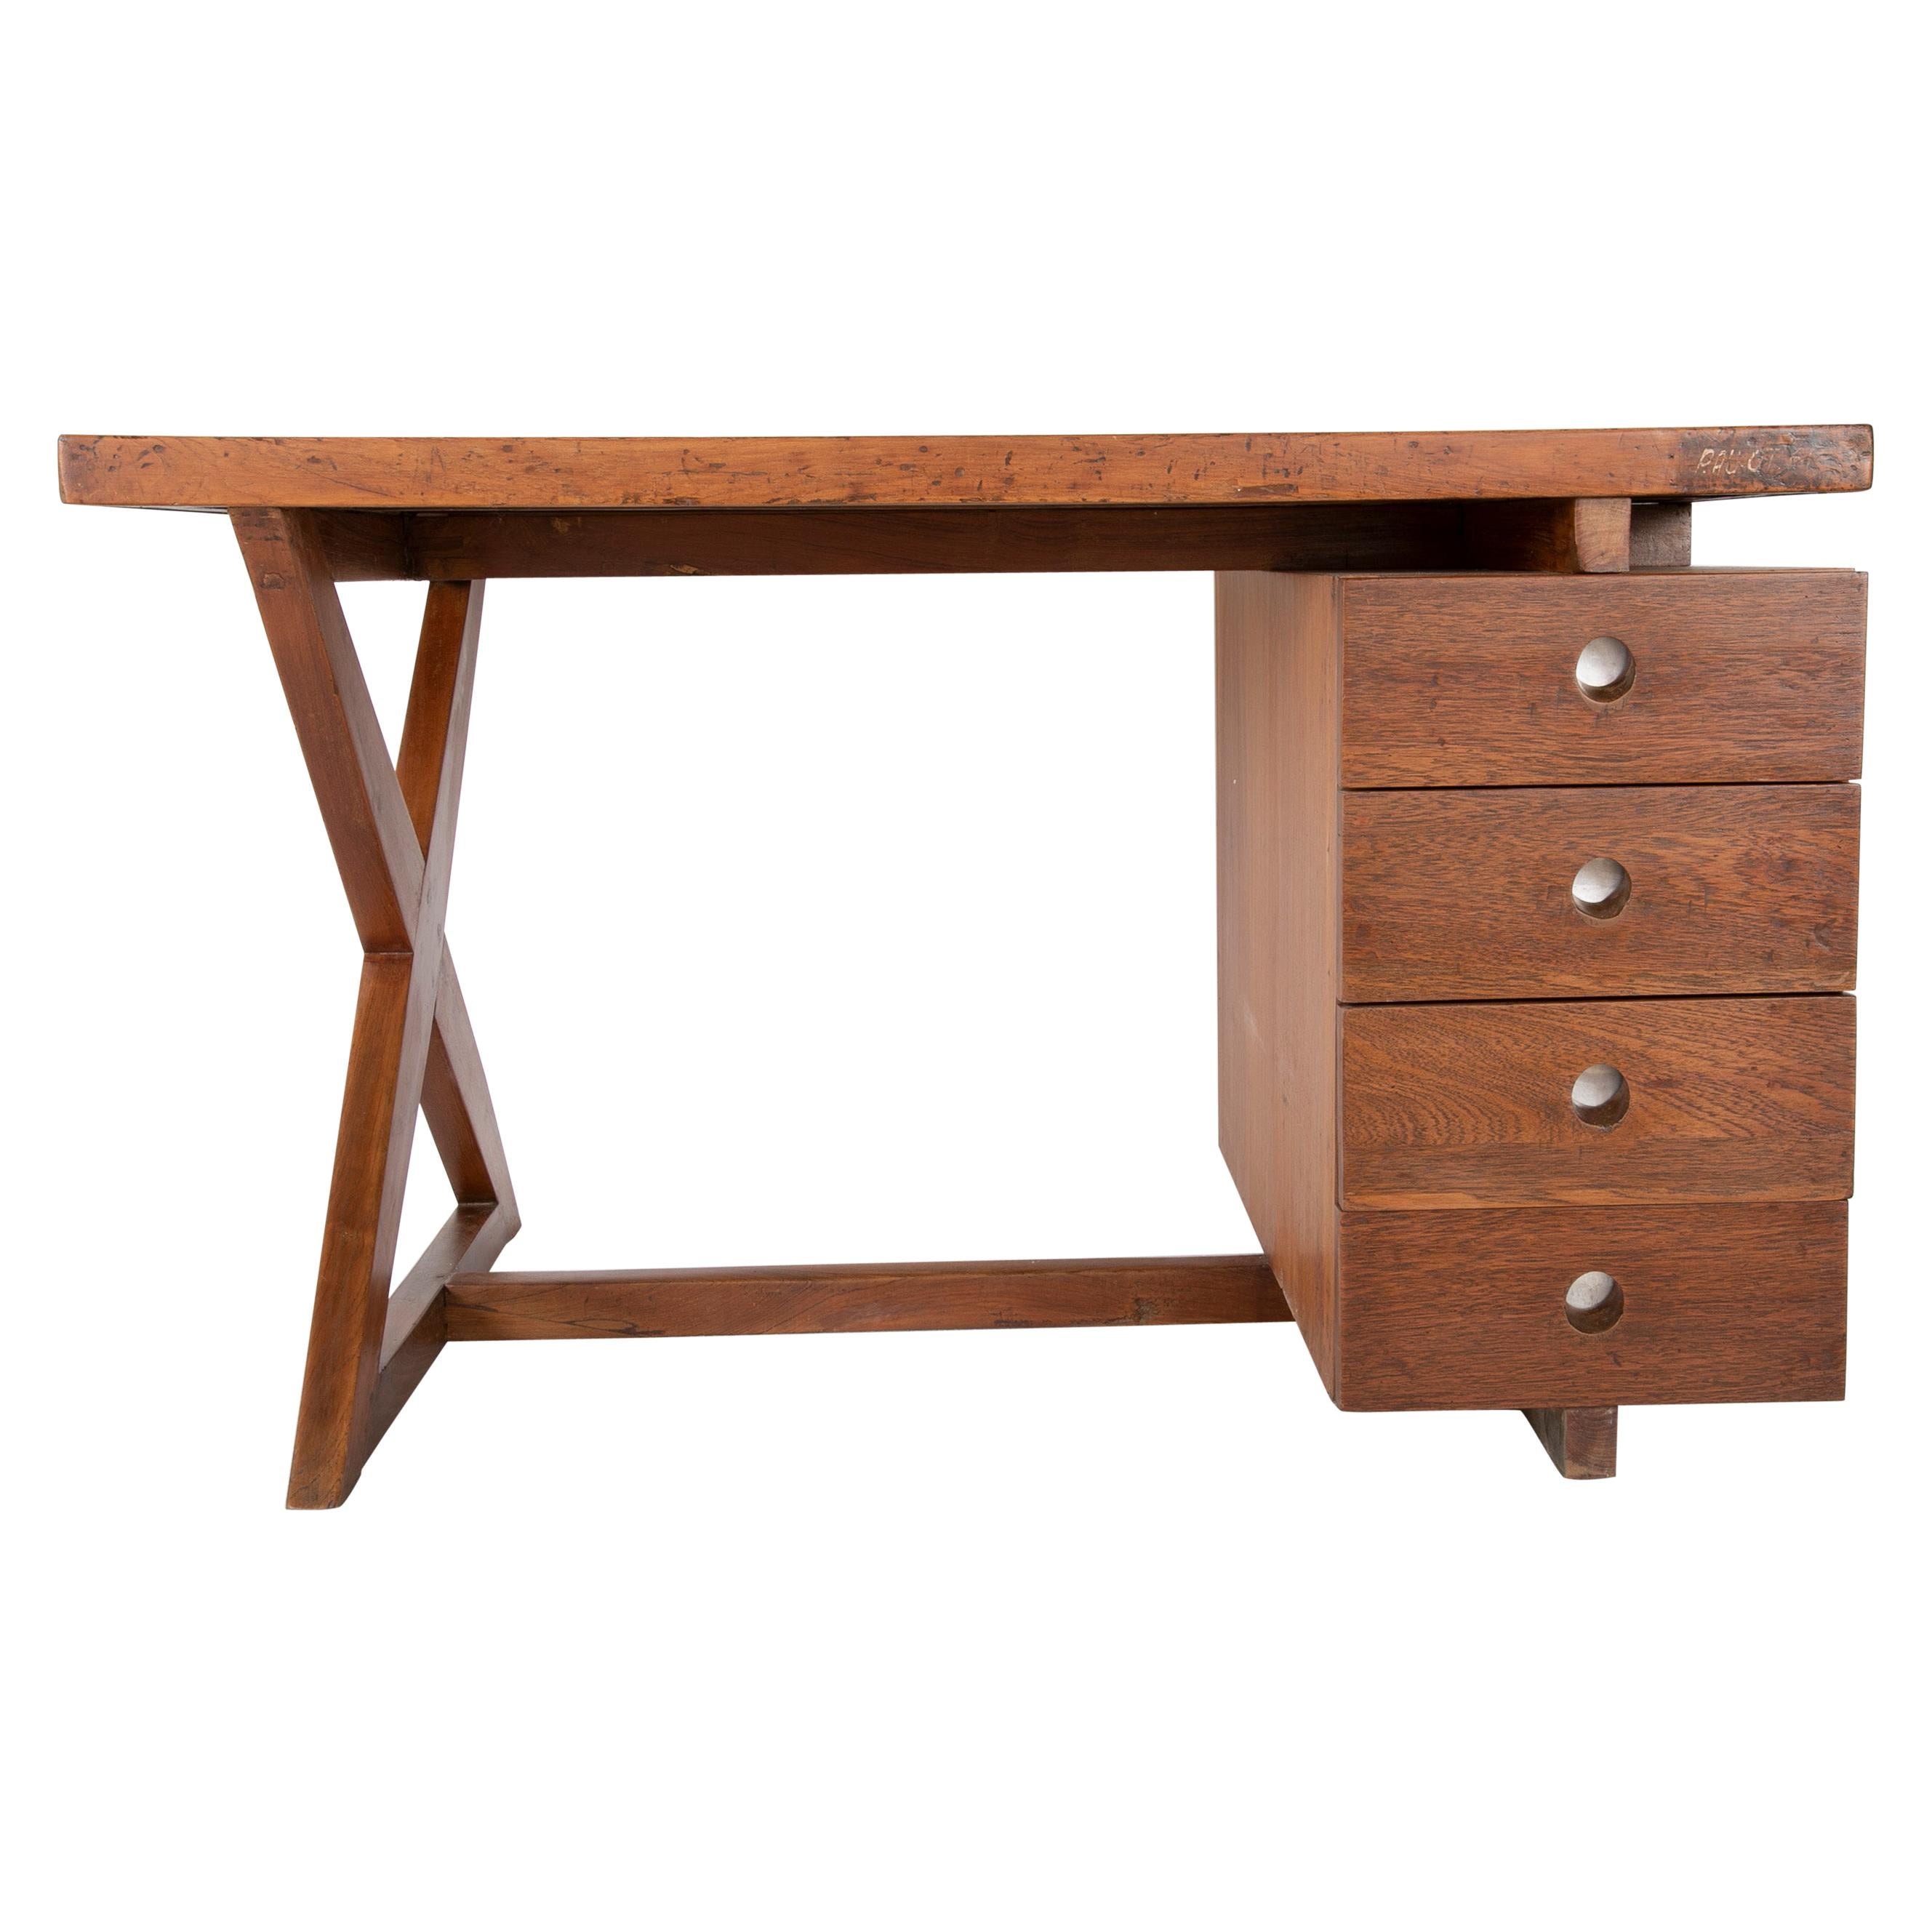 Original Pierre Jeanneret Partners Desk from the Offices of Chandigarh, India For Sale